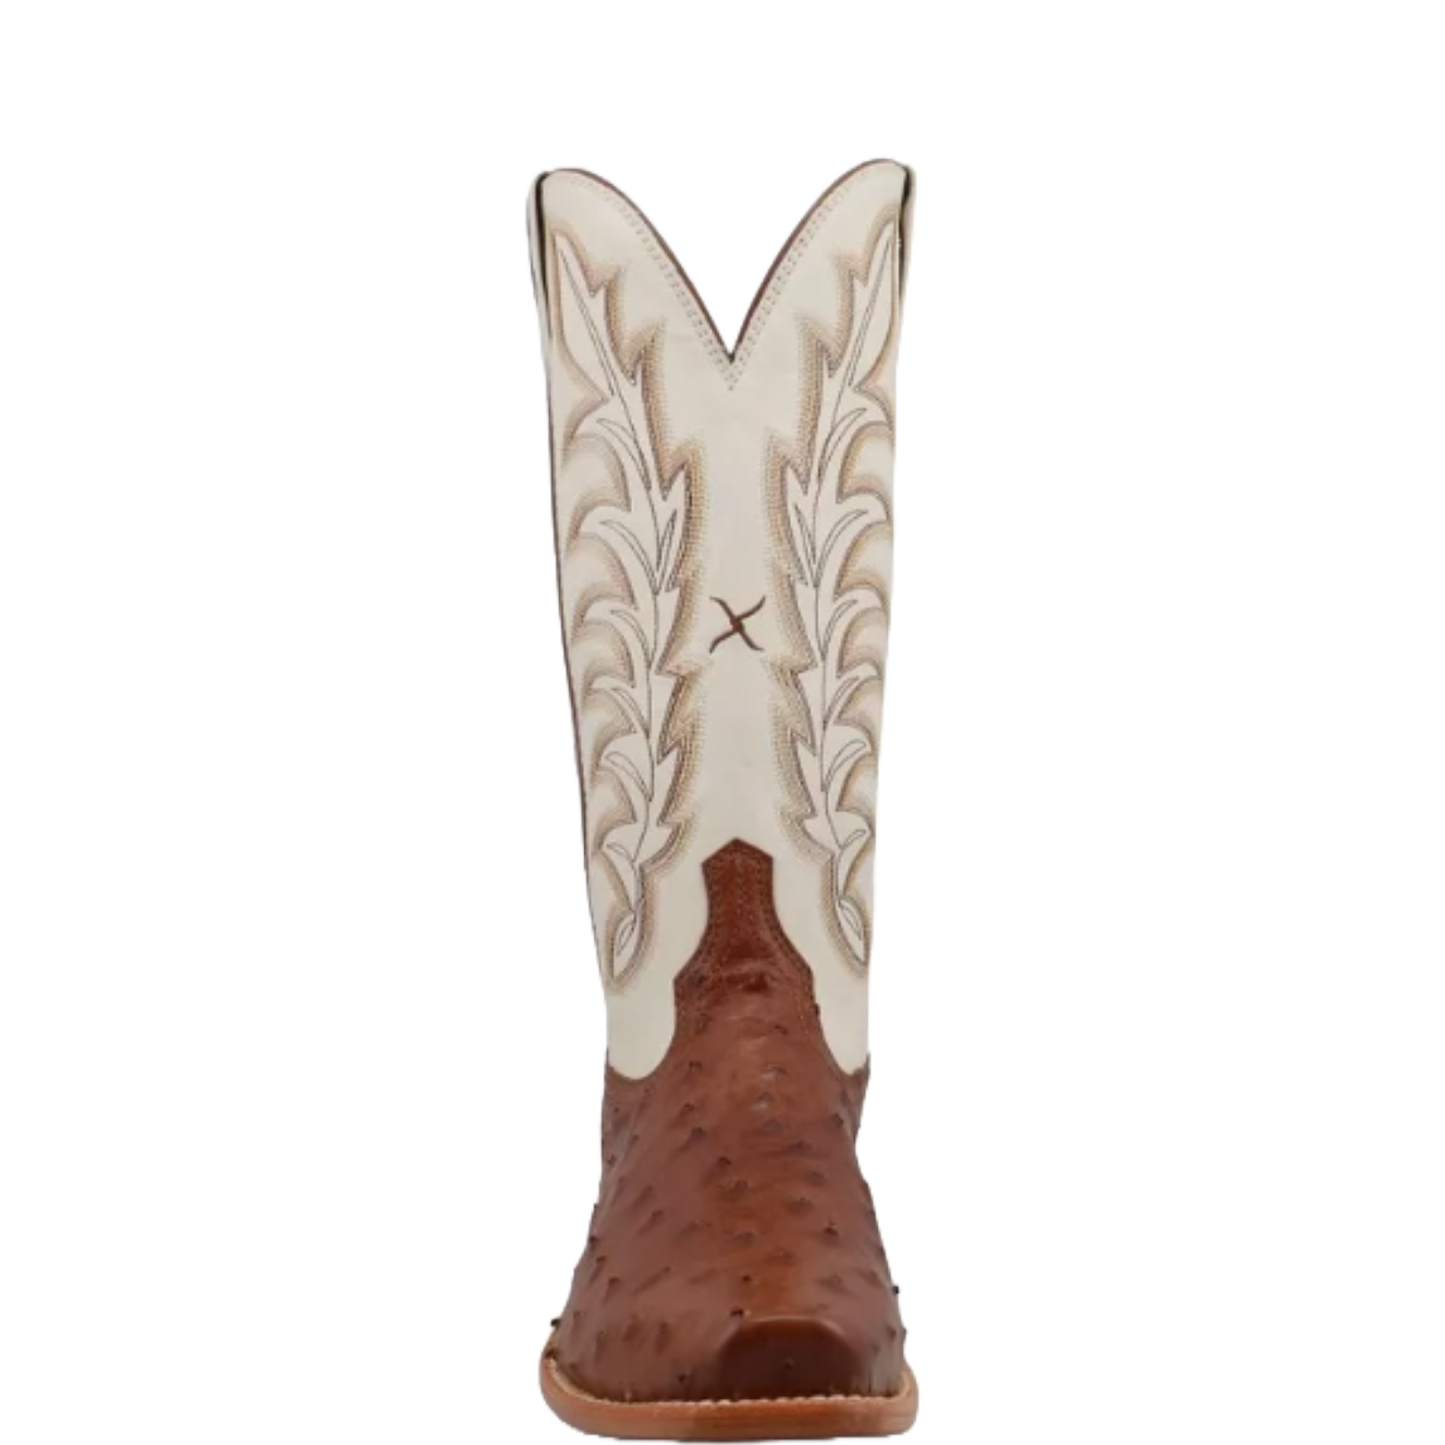 Twisted X Ladies Reserve Chesnut Ostrich White Western Boots WXPL002